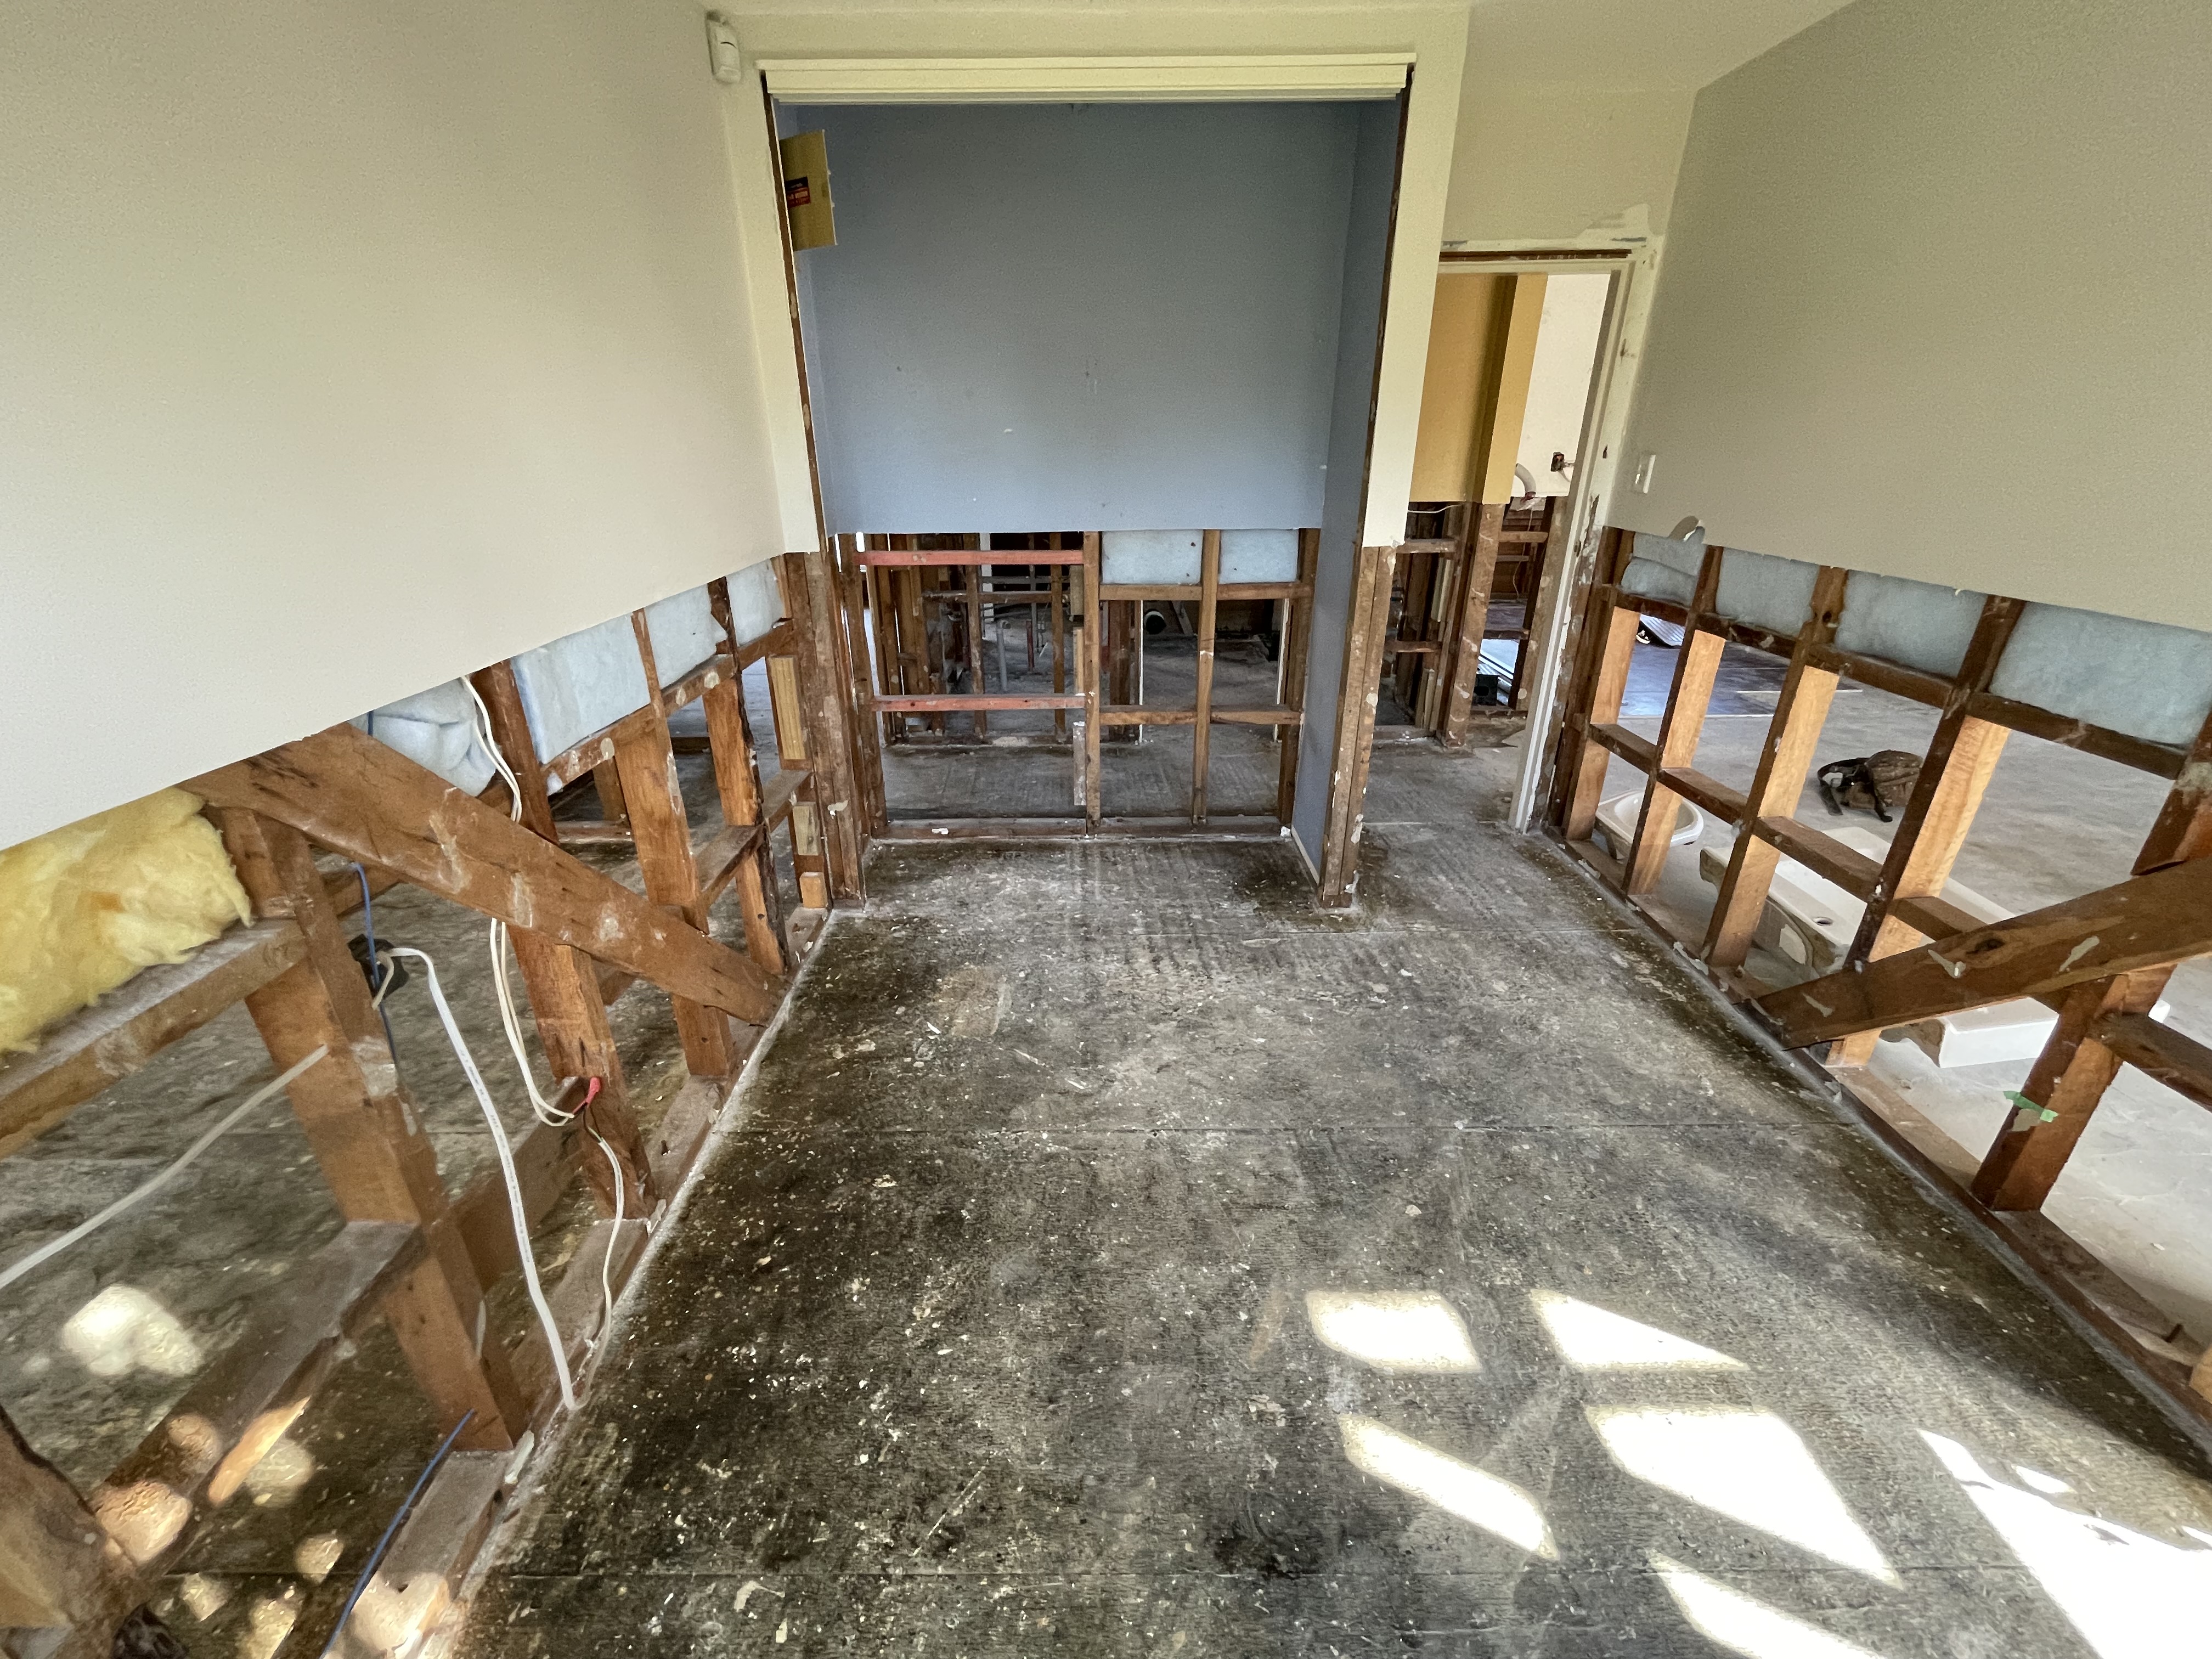 Work in progress to renovate flooded home in Mt Roskill, Auckland